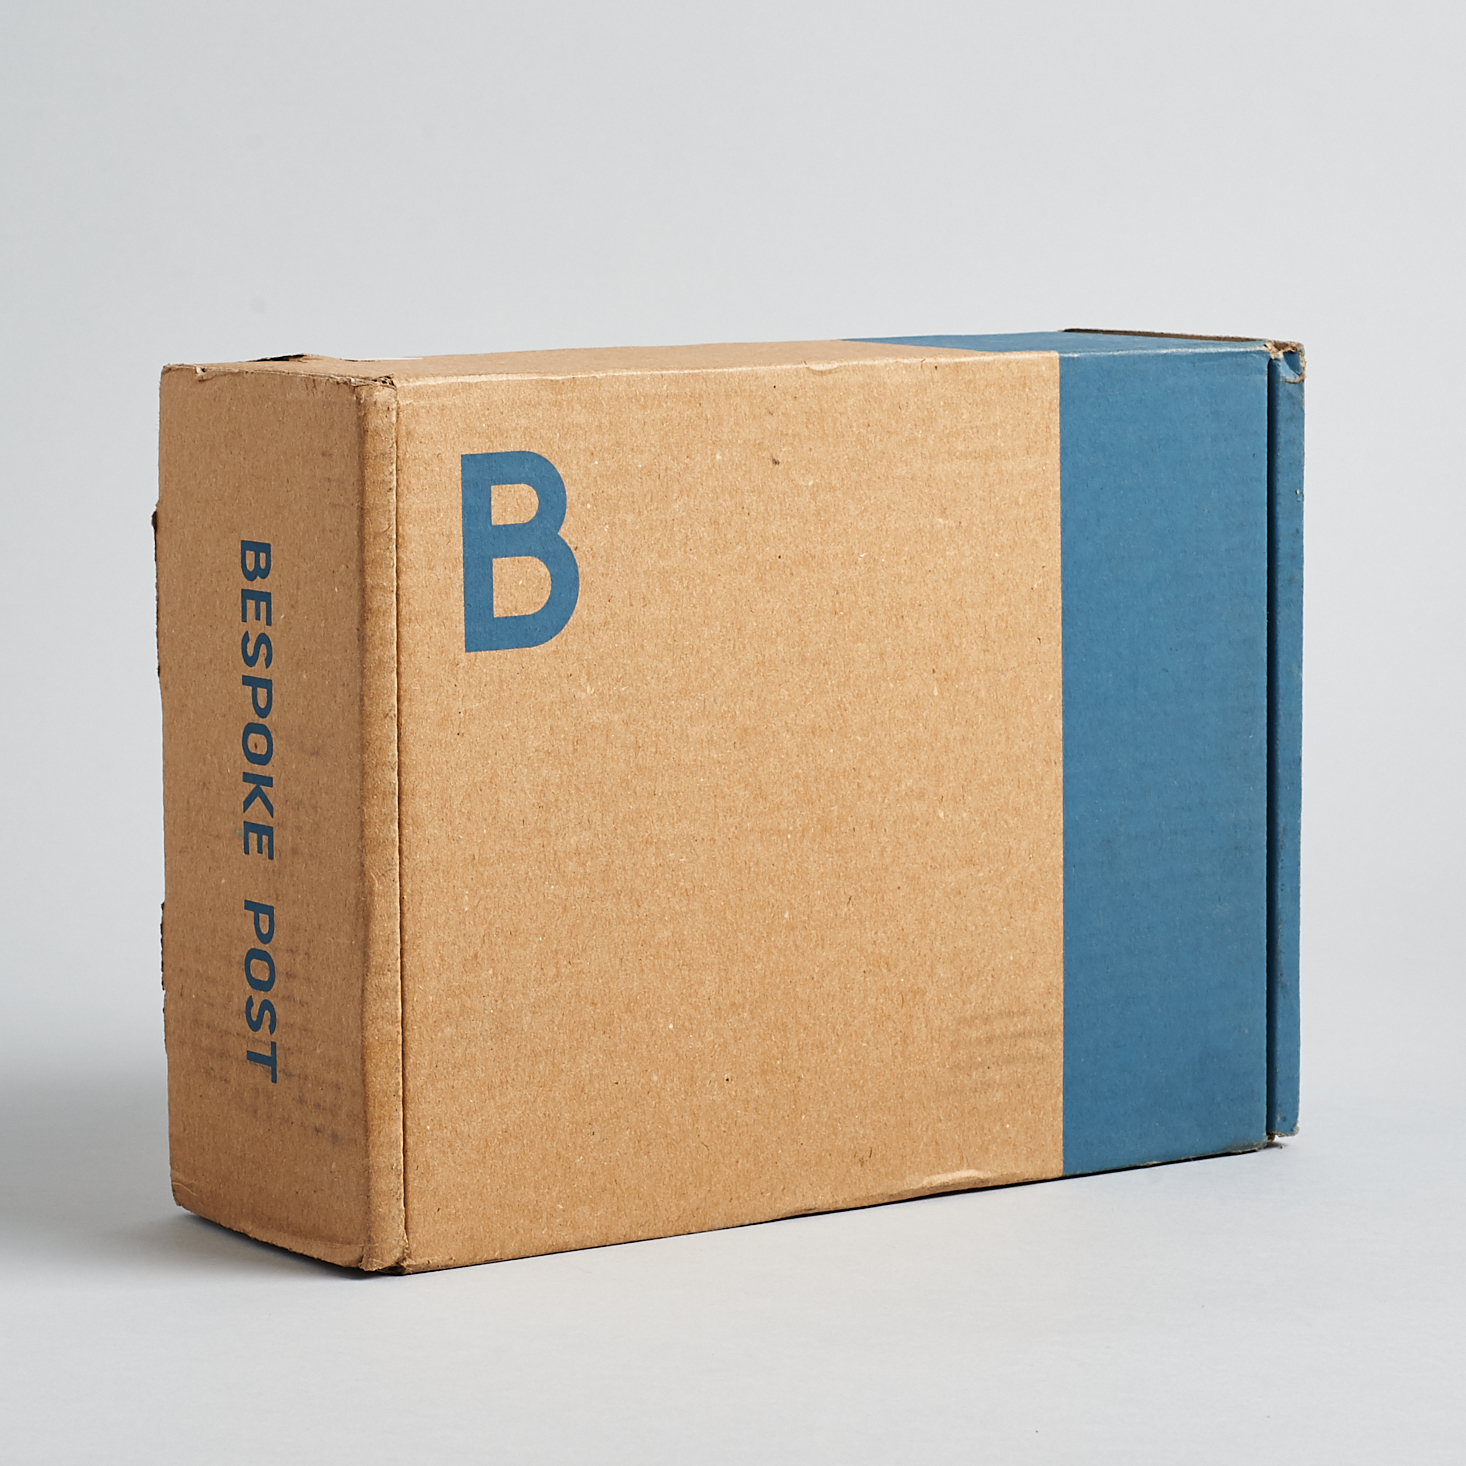 Bespoke Post Cyber Monday Deal – 40% Off Of Your First Box!